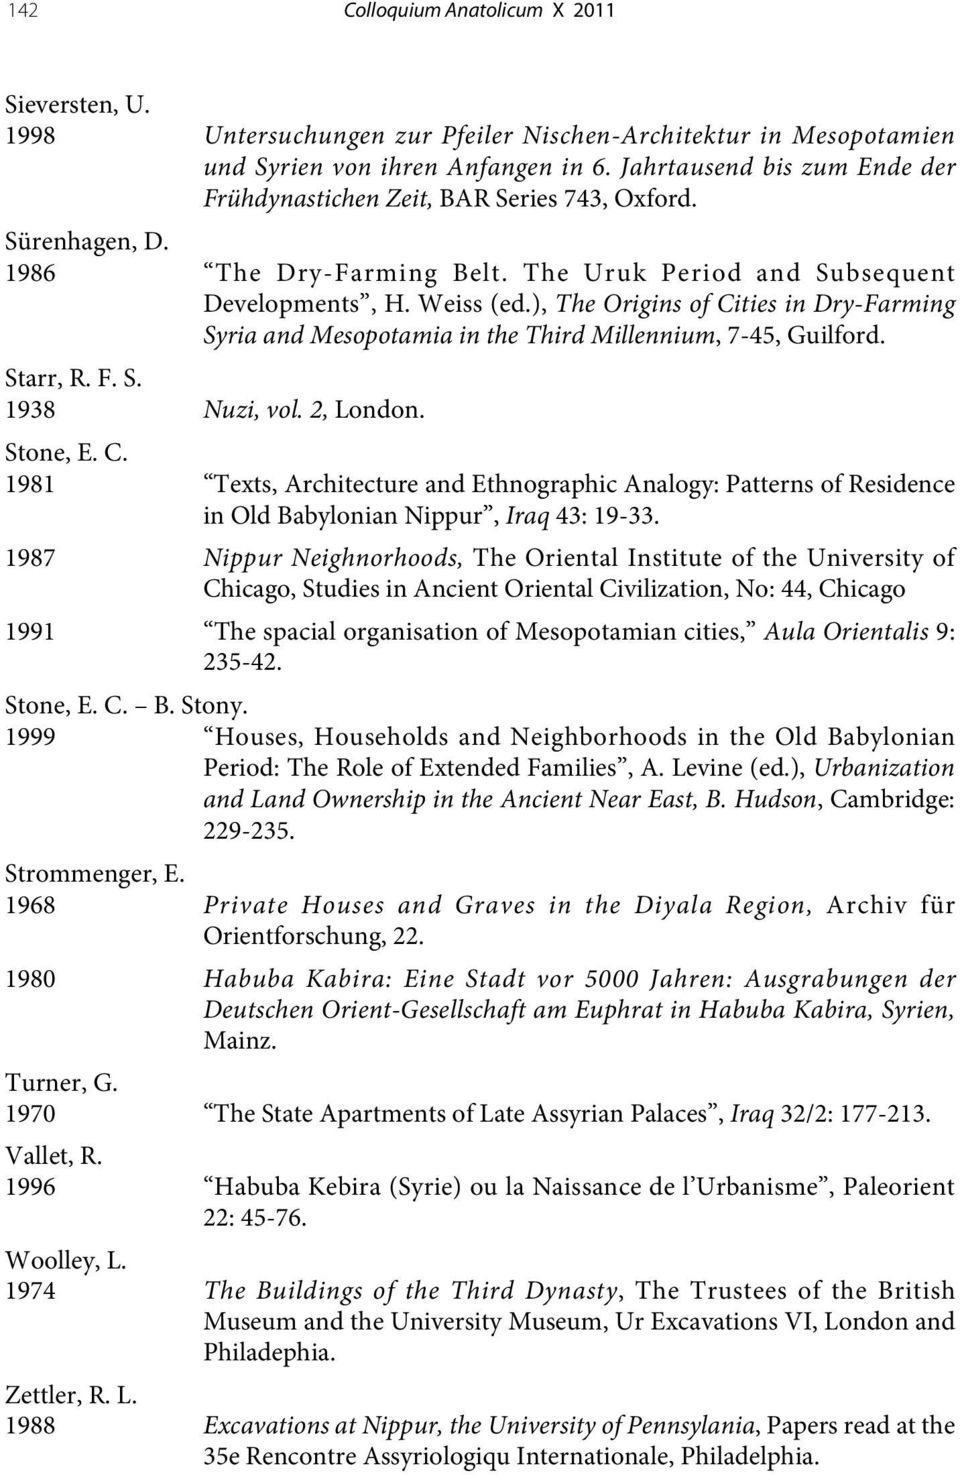 ), The Origins of Cities in Dry-Farming Syria and Mesopotamia in the Third Millennium, 7-45, Guilford. Starr, R. F. S. 1938 Nuzi, vol. 2, London. Stone, E. C. 1981 Texts, Architecture and Ethnographic Analogy: Patterns of Residence in Old Babylonian Nippur, Iraq 43: 19-33.